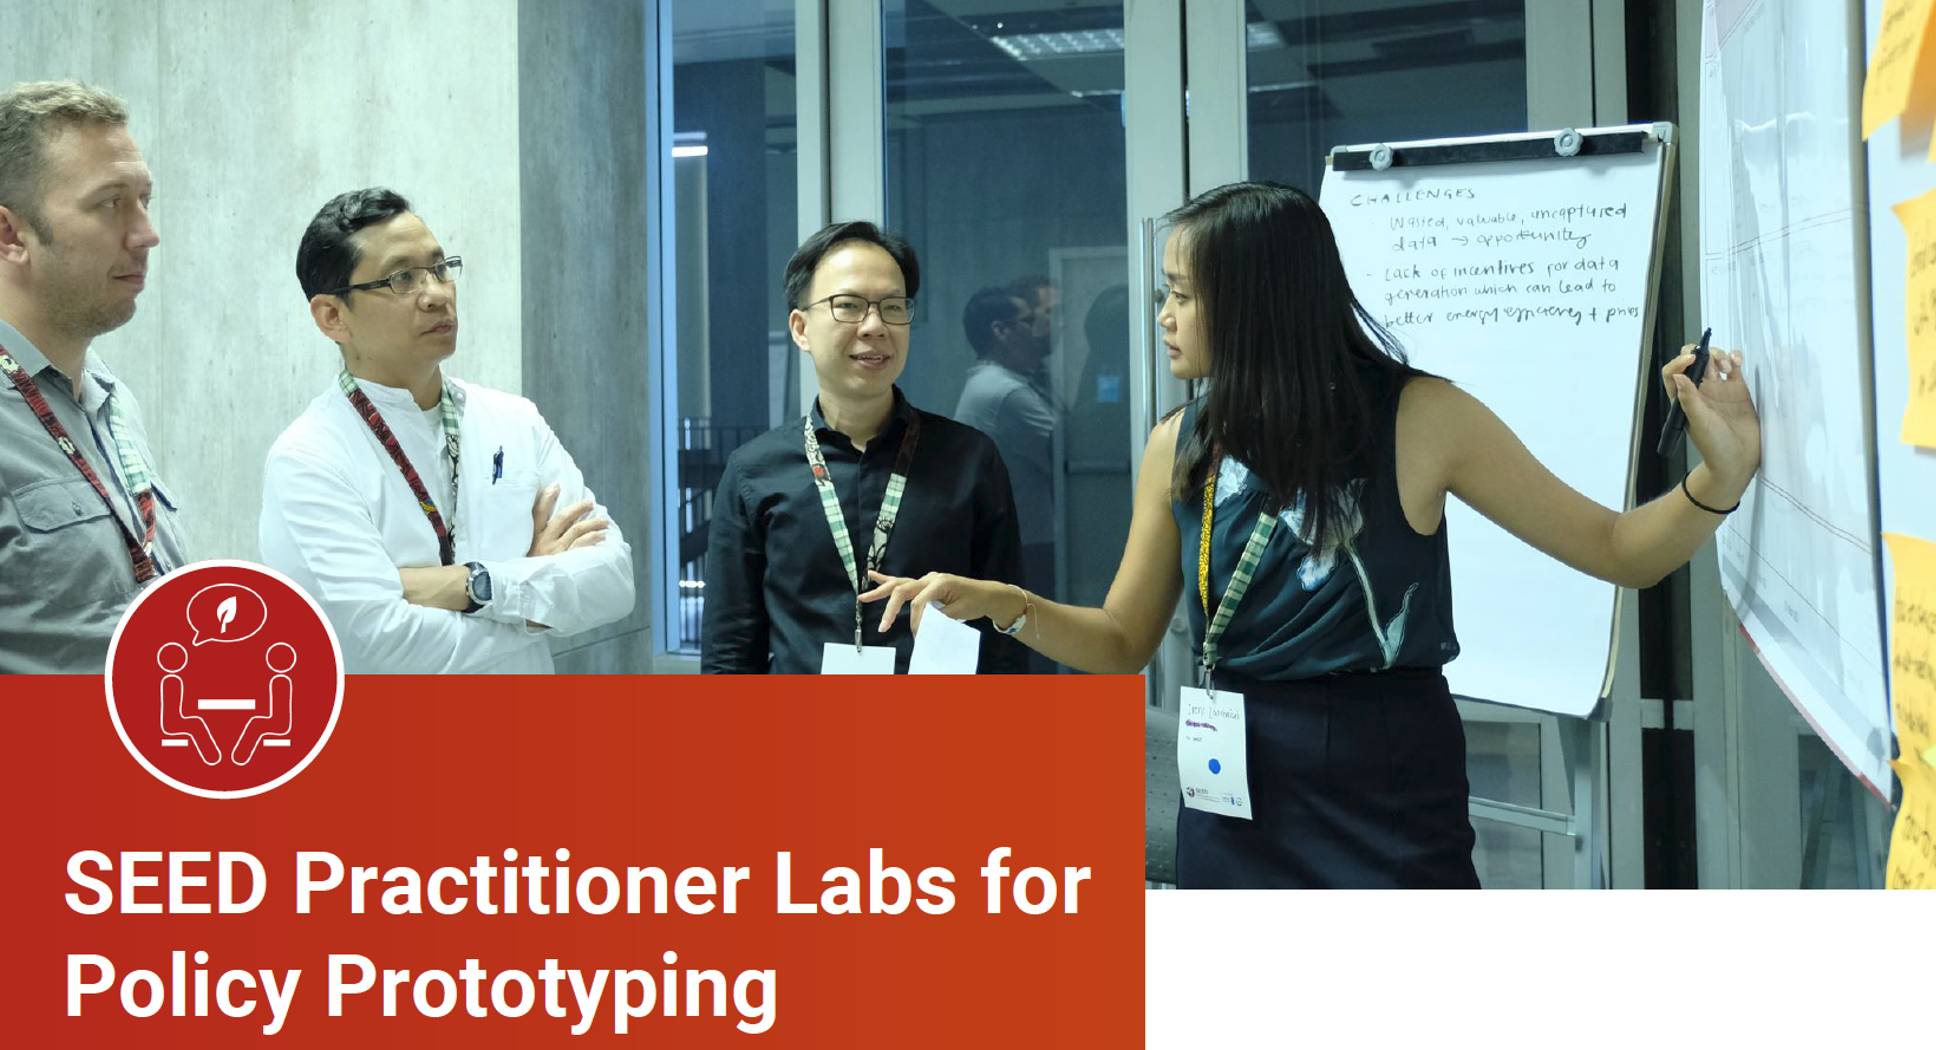 SEED Practitioner Labs for Policy Prototyping